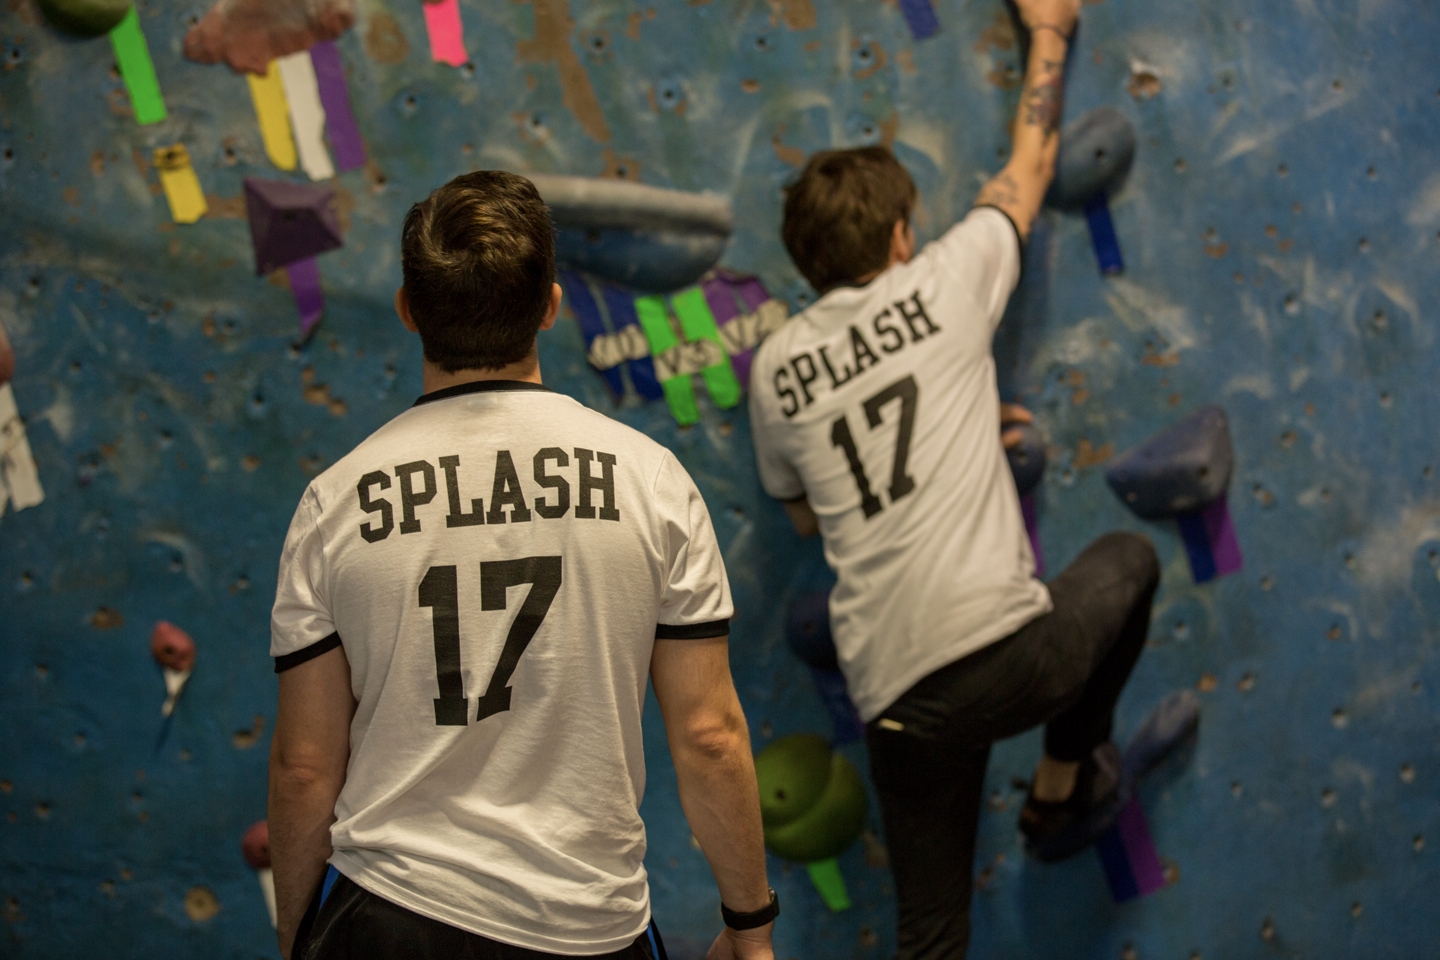 At Splash, we encourage each other to reach for the impossible! 